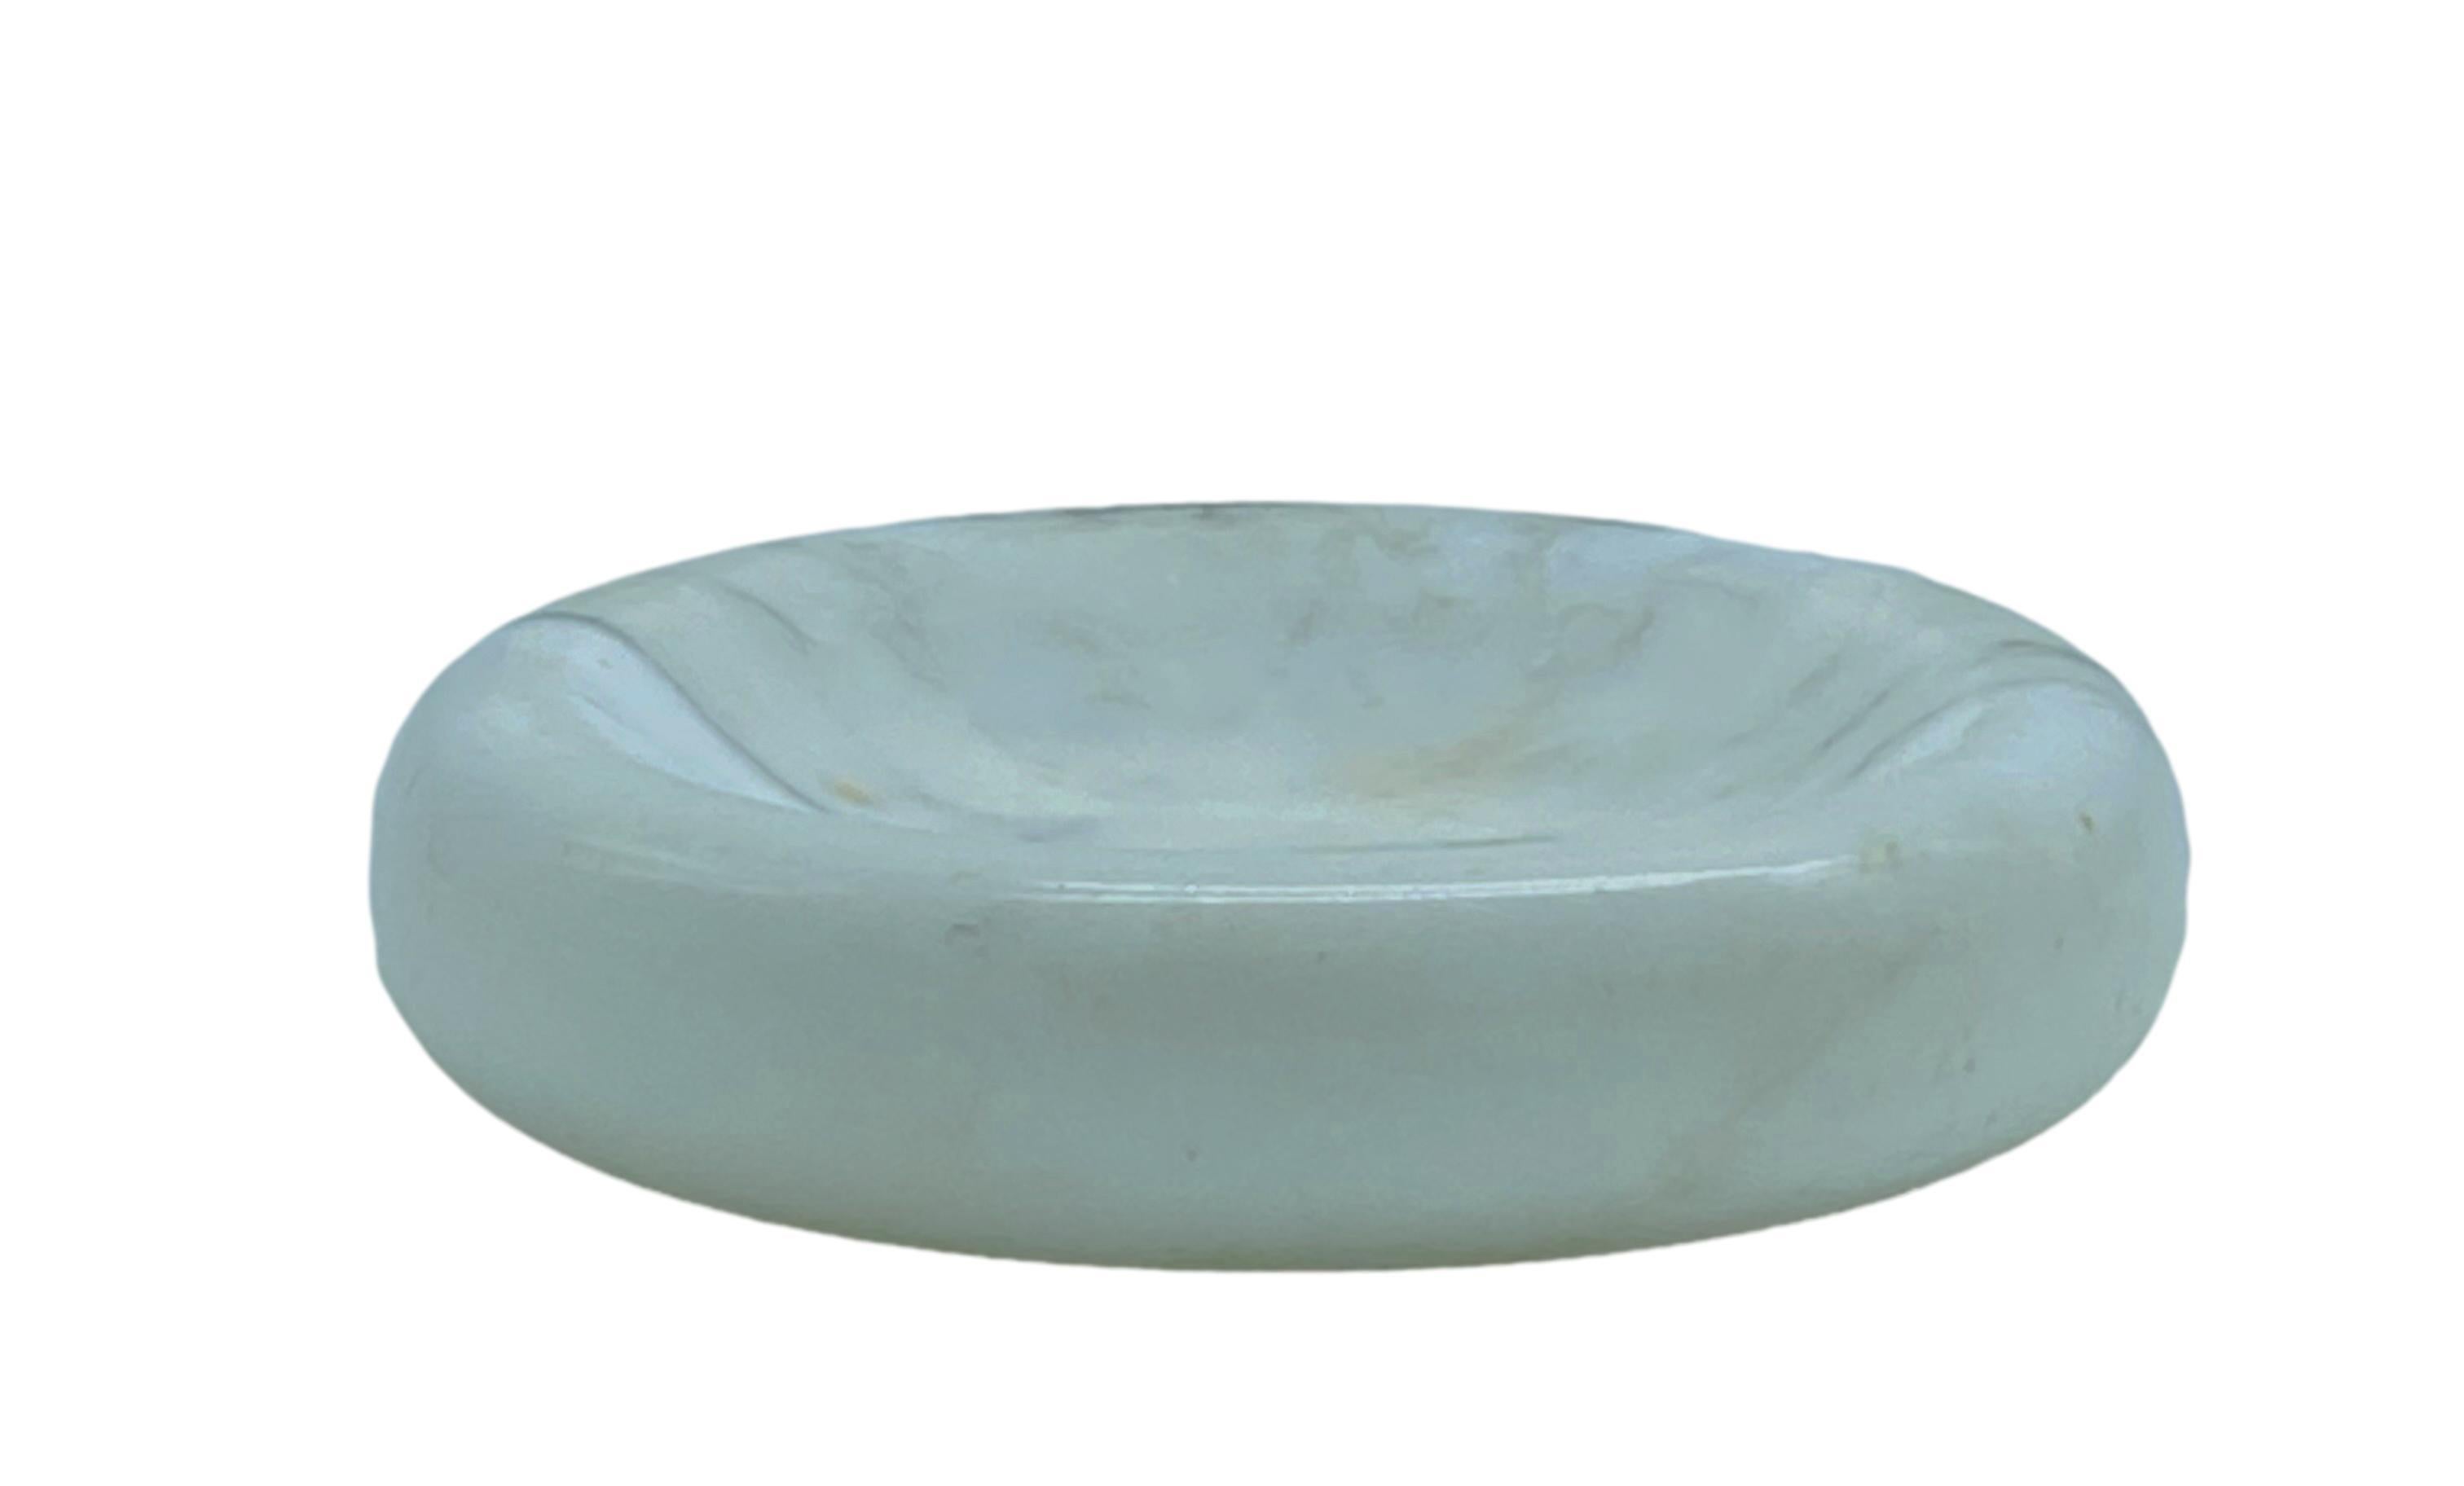 Round tray or centrepiece in White Marble with various shades and veining, handmade by Italian craftsmen specialised in marble processing. In the style of Up & Up 1970.